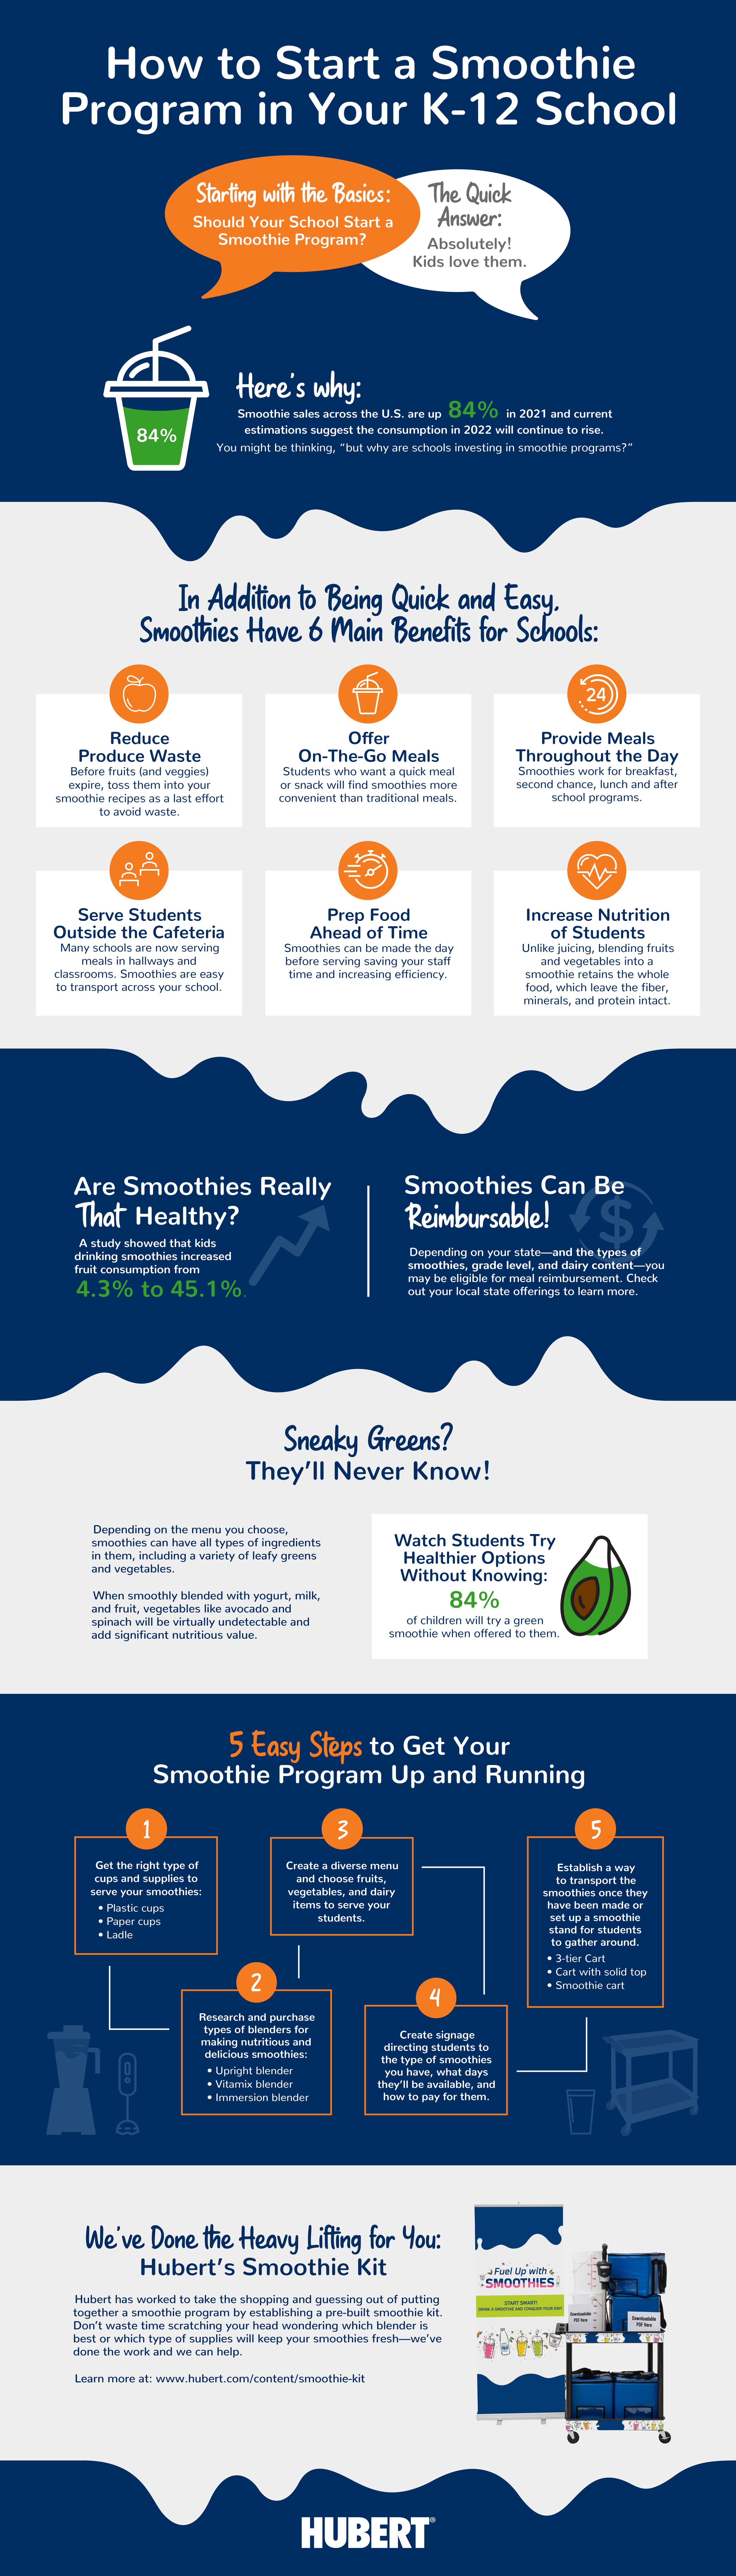 How to Start a Smoothie Program in Your K-12 School, full text below